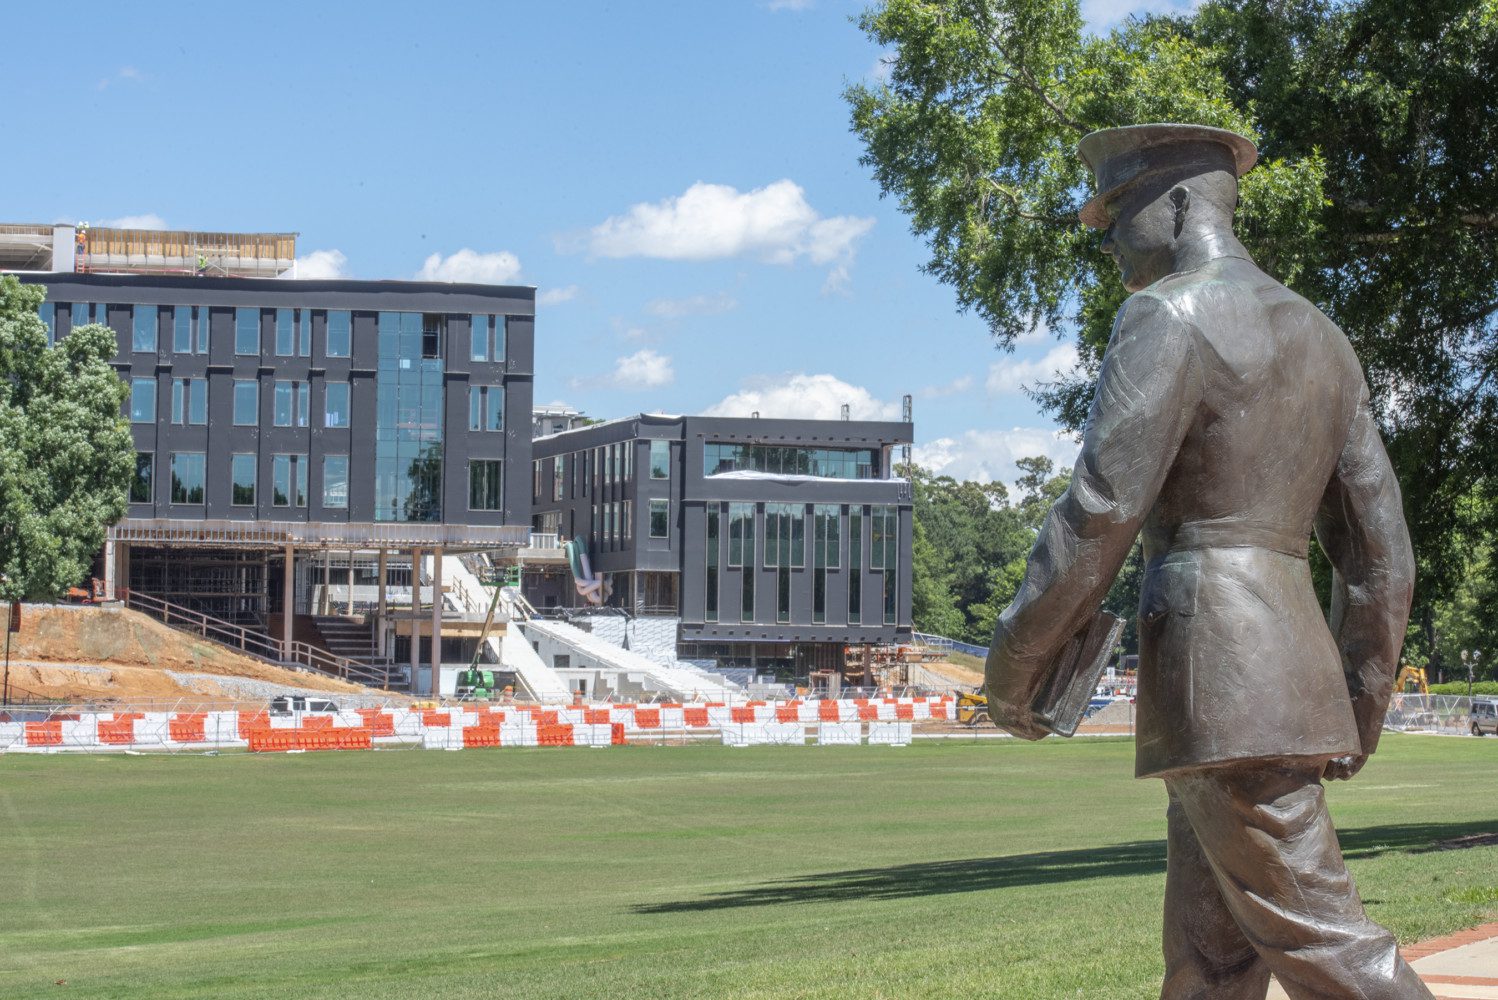 Pic of cadet statue overlooking Bowman field